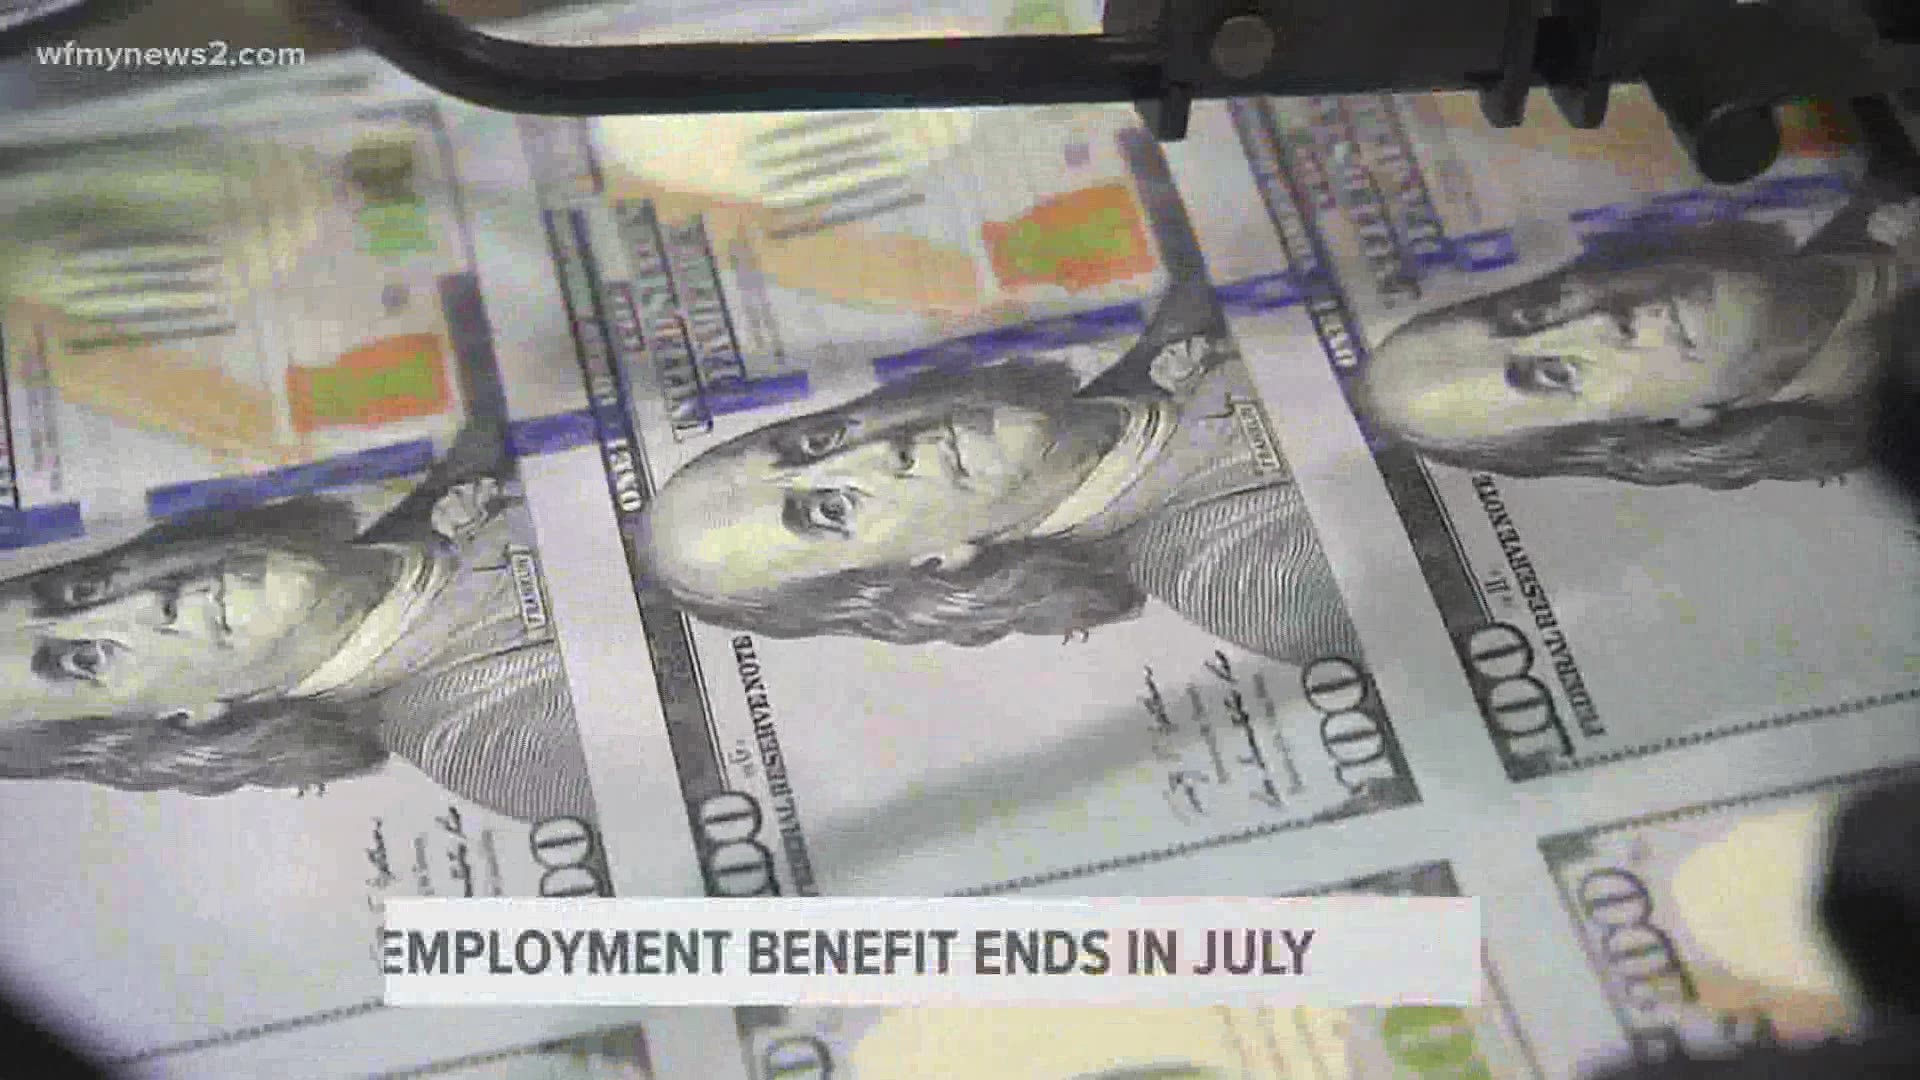 Money expert Ja'net Adams gives you three ways to prepare for the end of the government's $600 per week unemployment benefits in July.